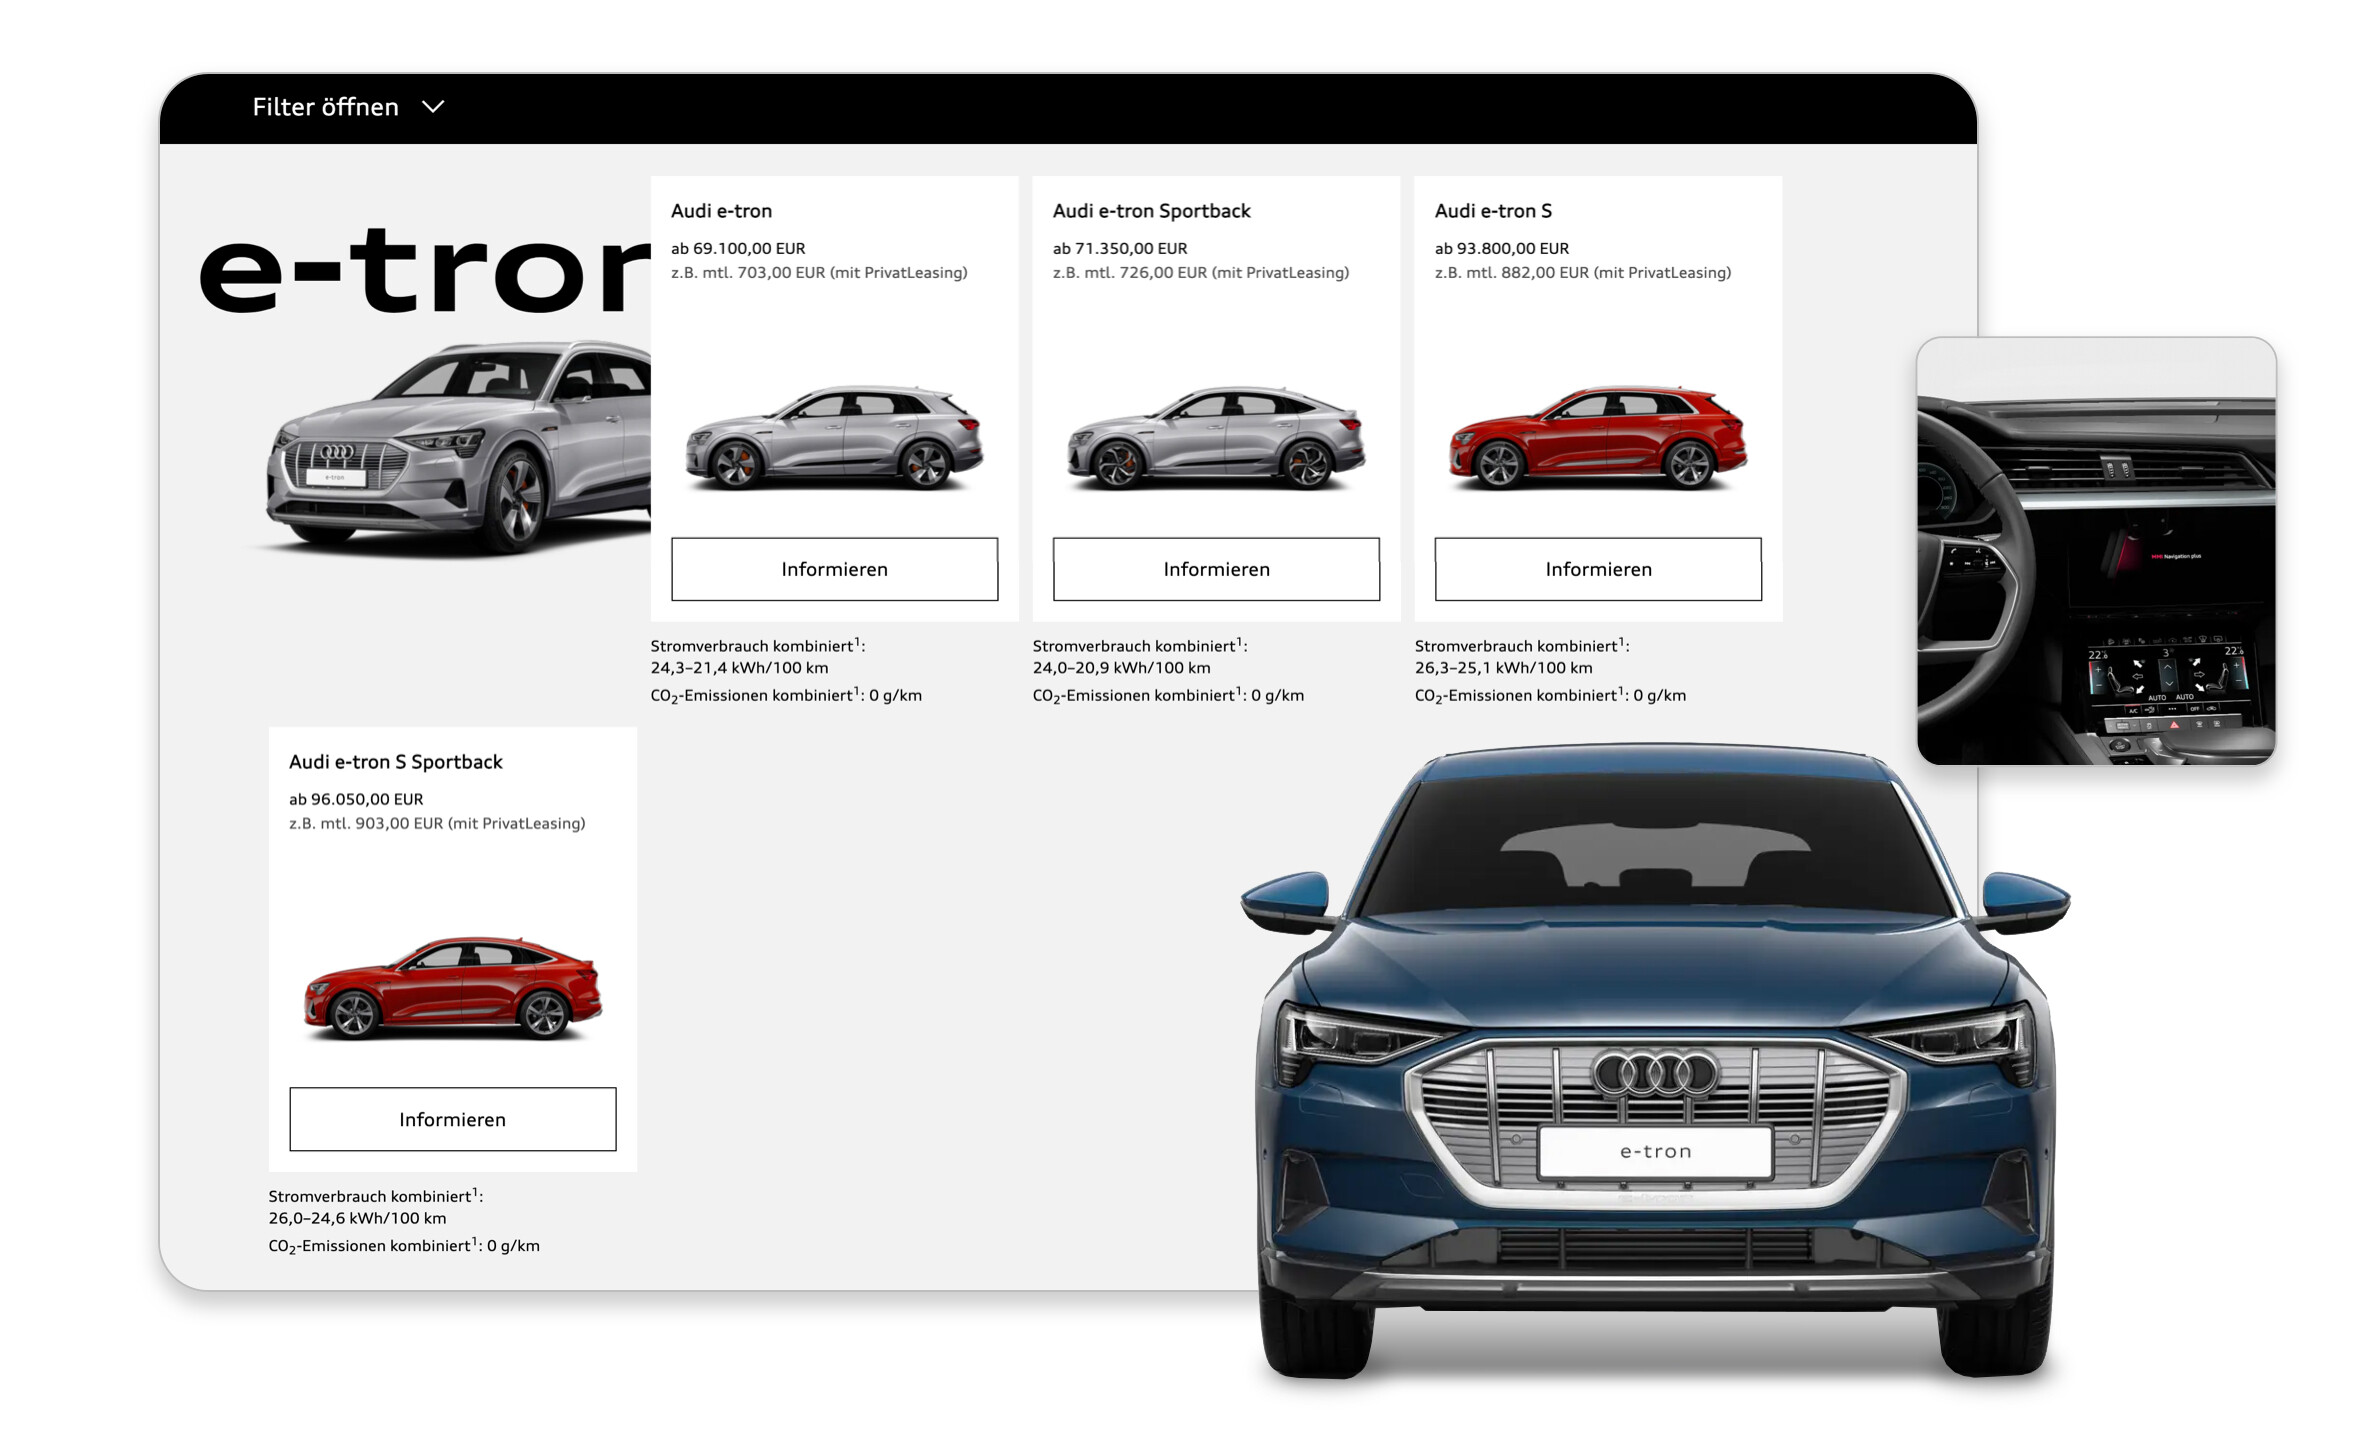 Audi's new scalable, global commerce infrastructure is aligned with their values and allows them to leverage new business models in only a few weeks